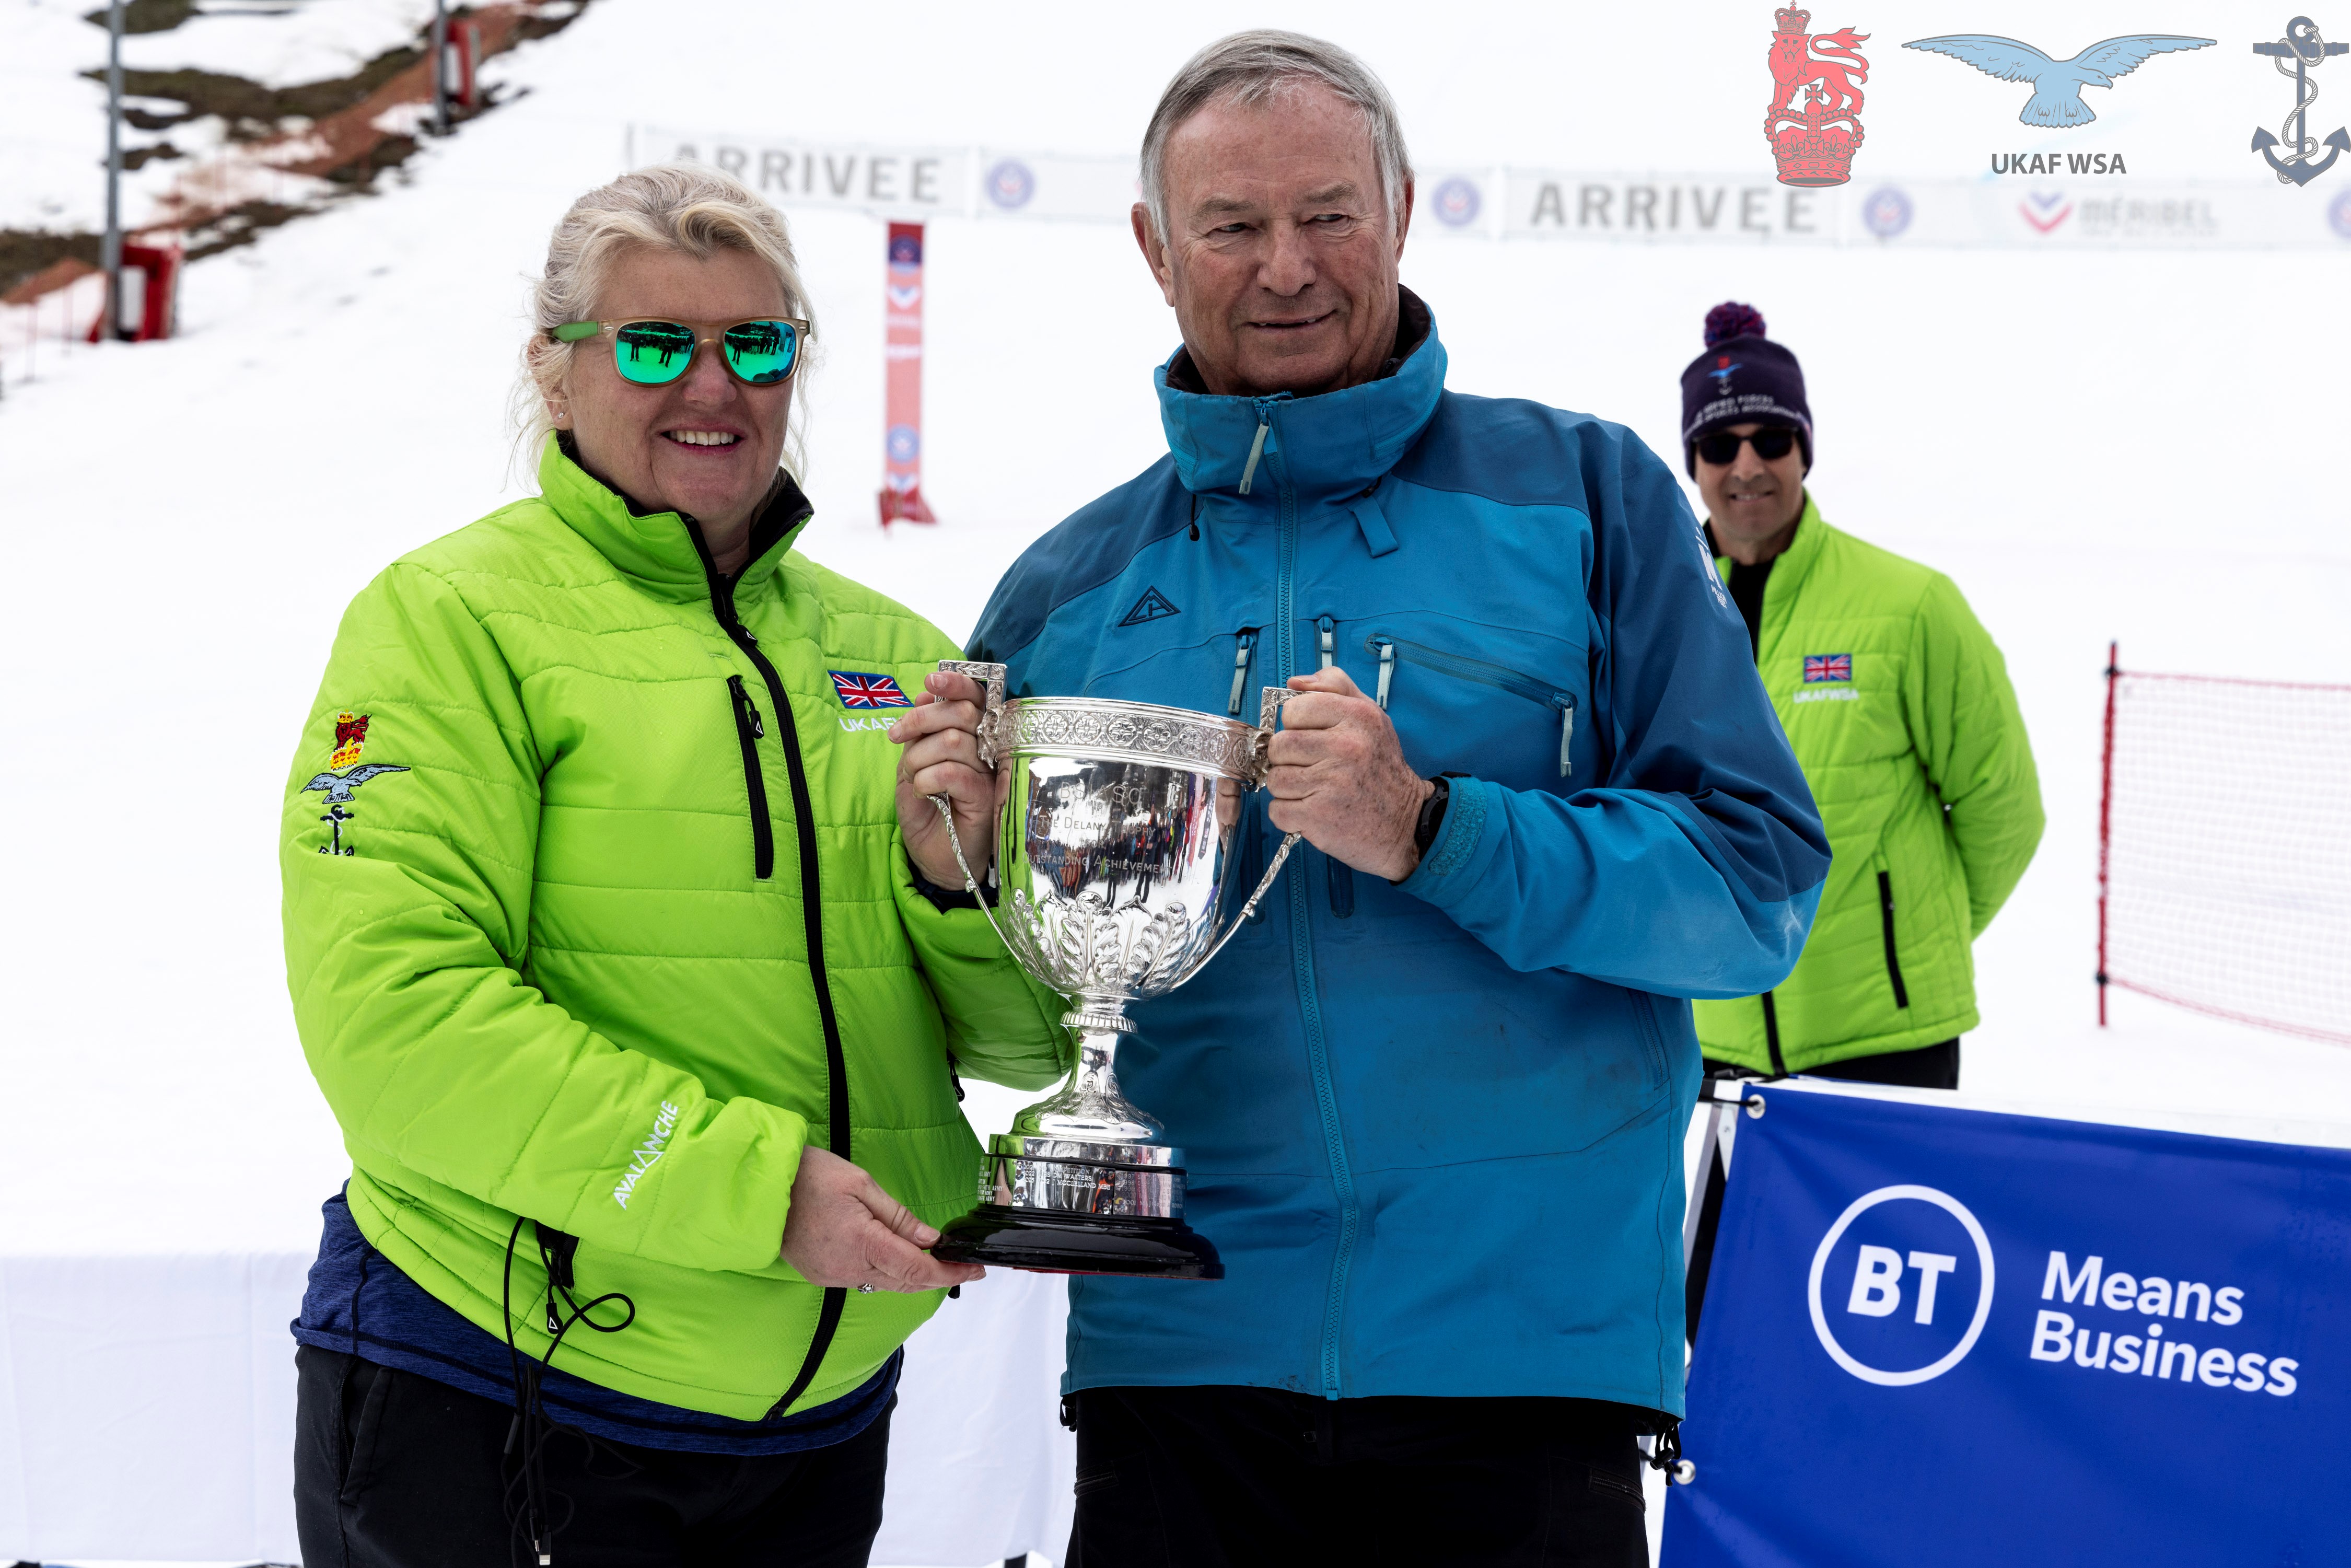 Cdr Nicky Cullen being presented with the Oliver Delaney Trophy in front of snowy ski slopes. 